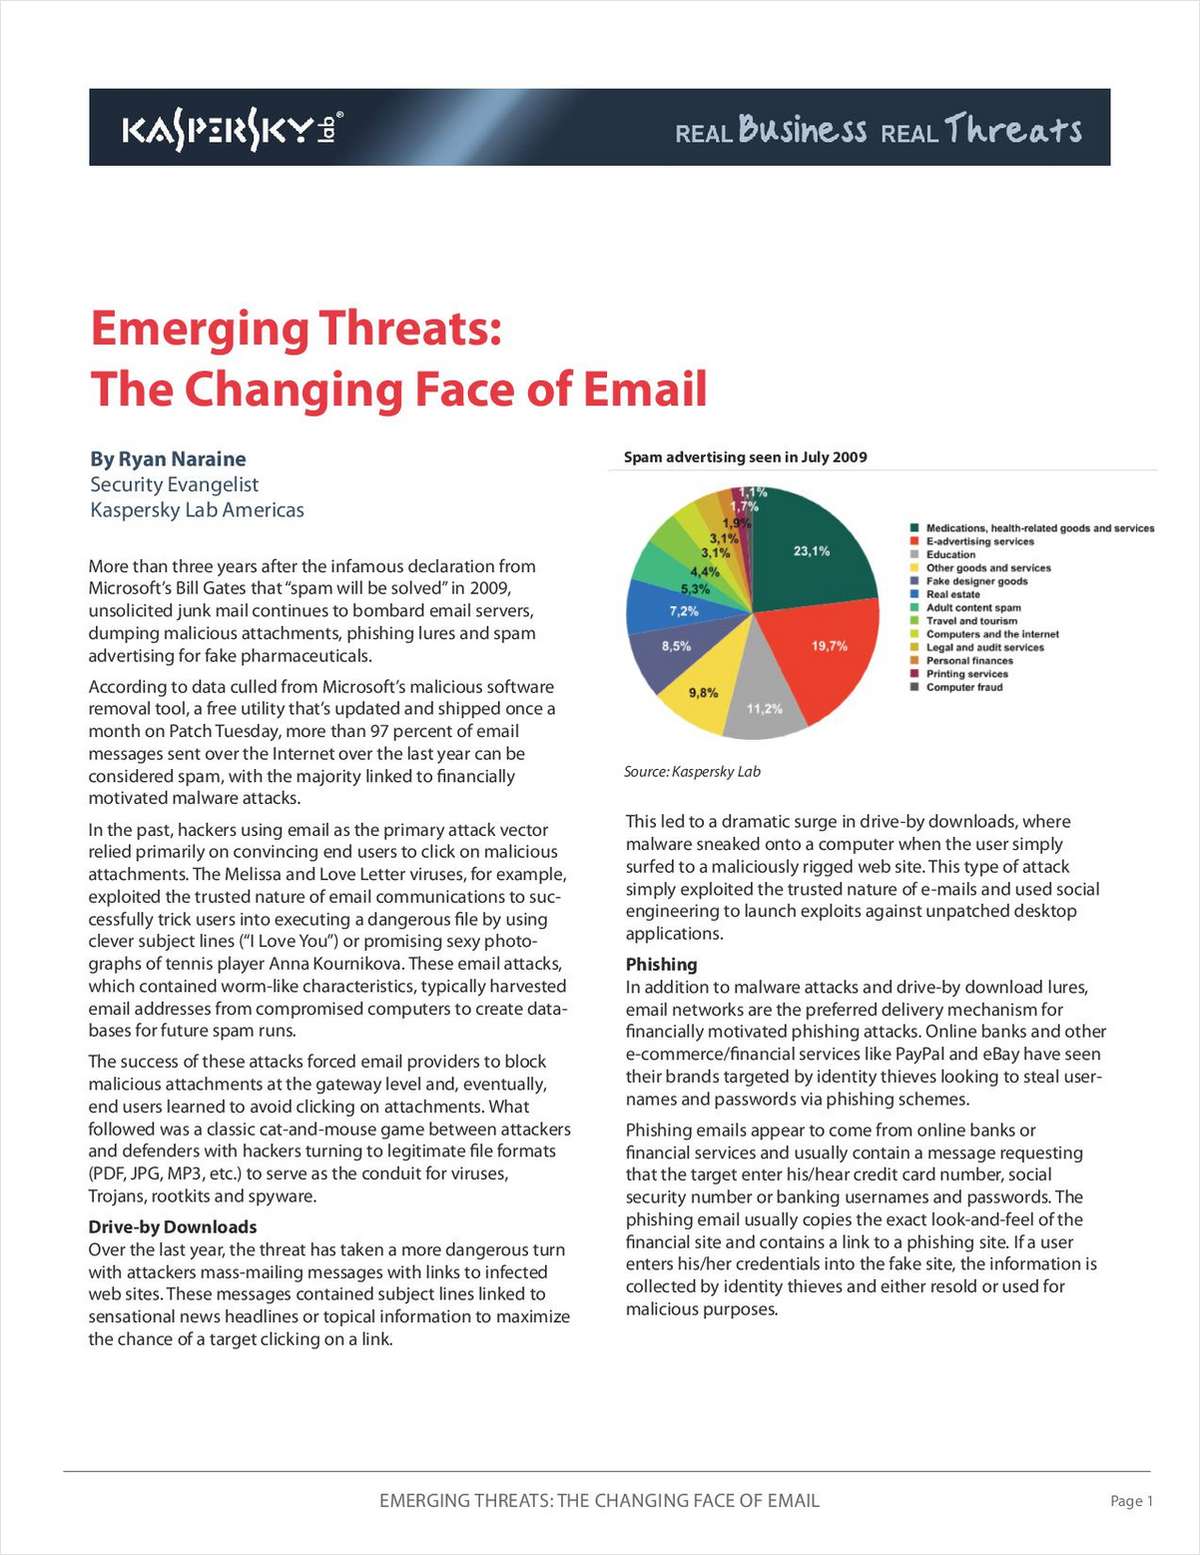 Emerging Threats: The Changing Face of Email